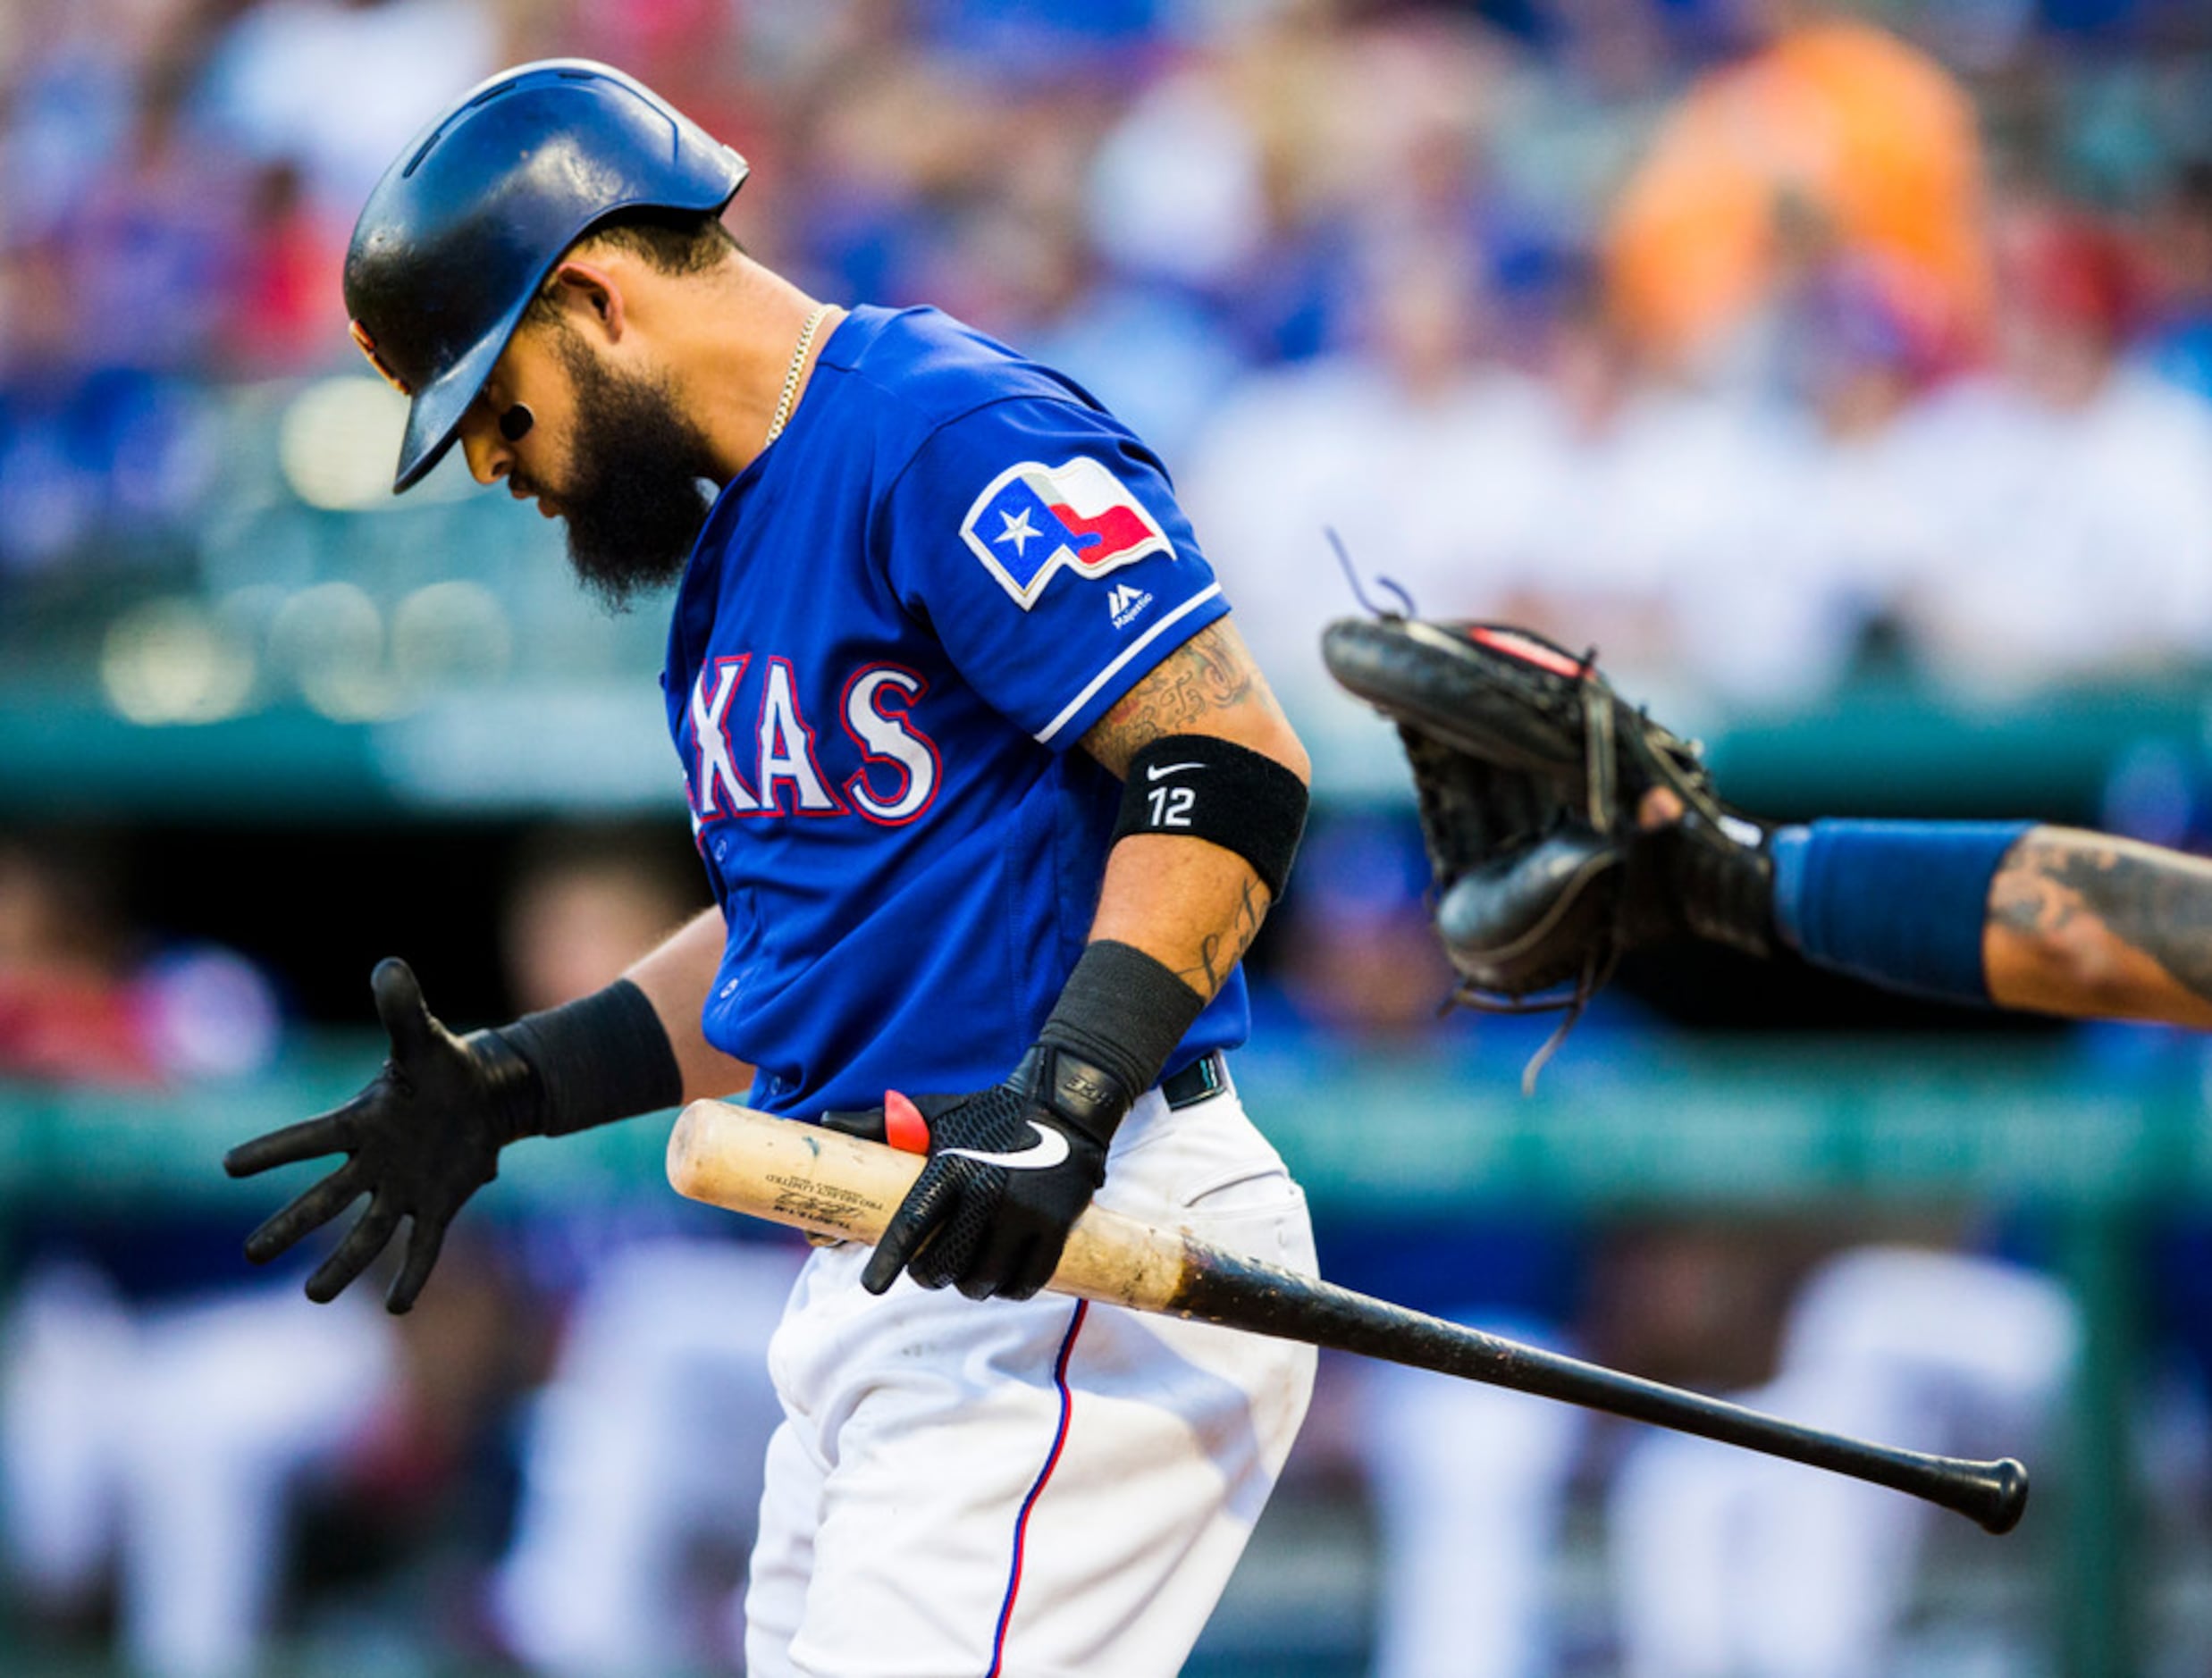 Rougned Odor's mean right cross just scored him free barbecue for life